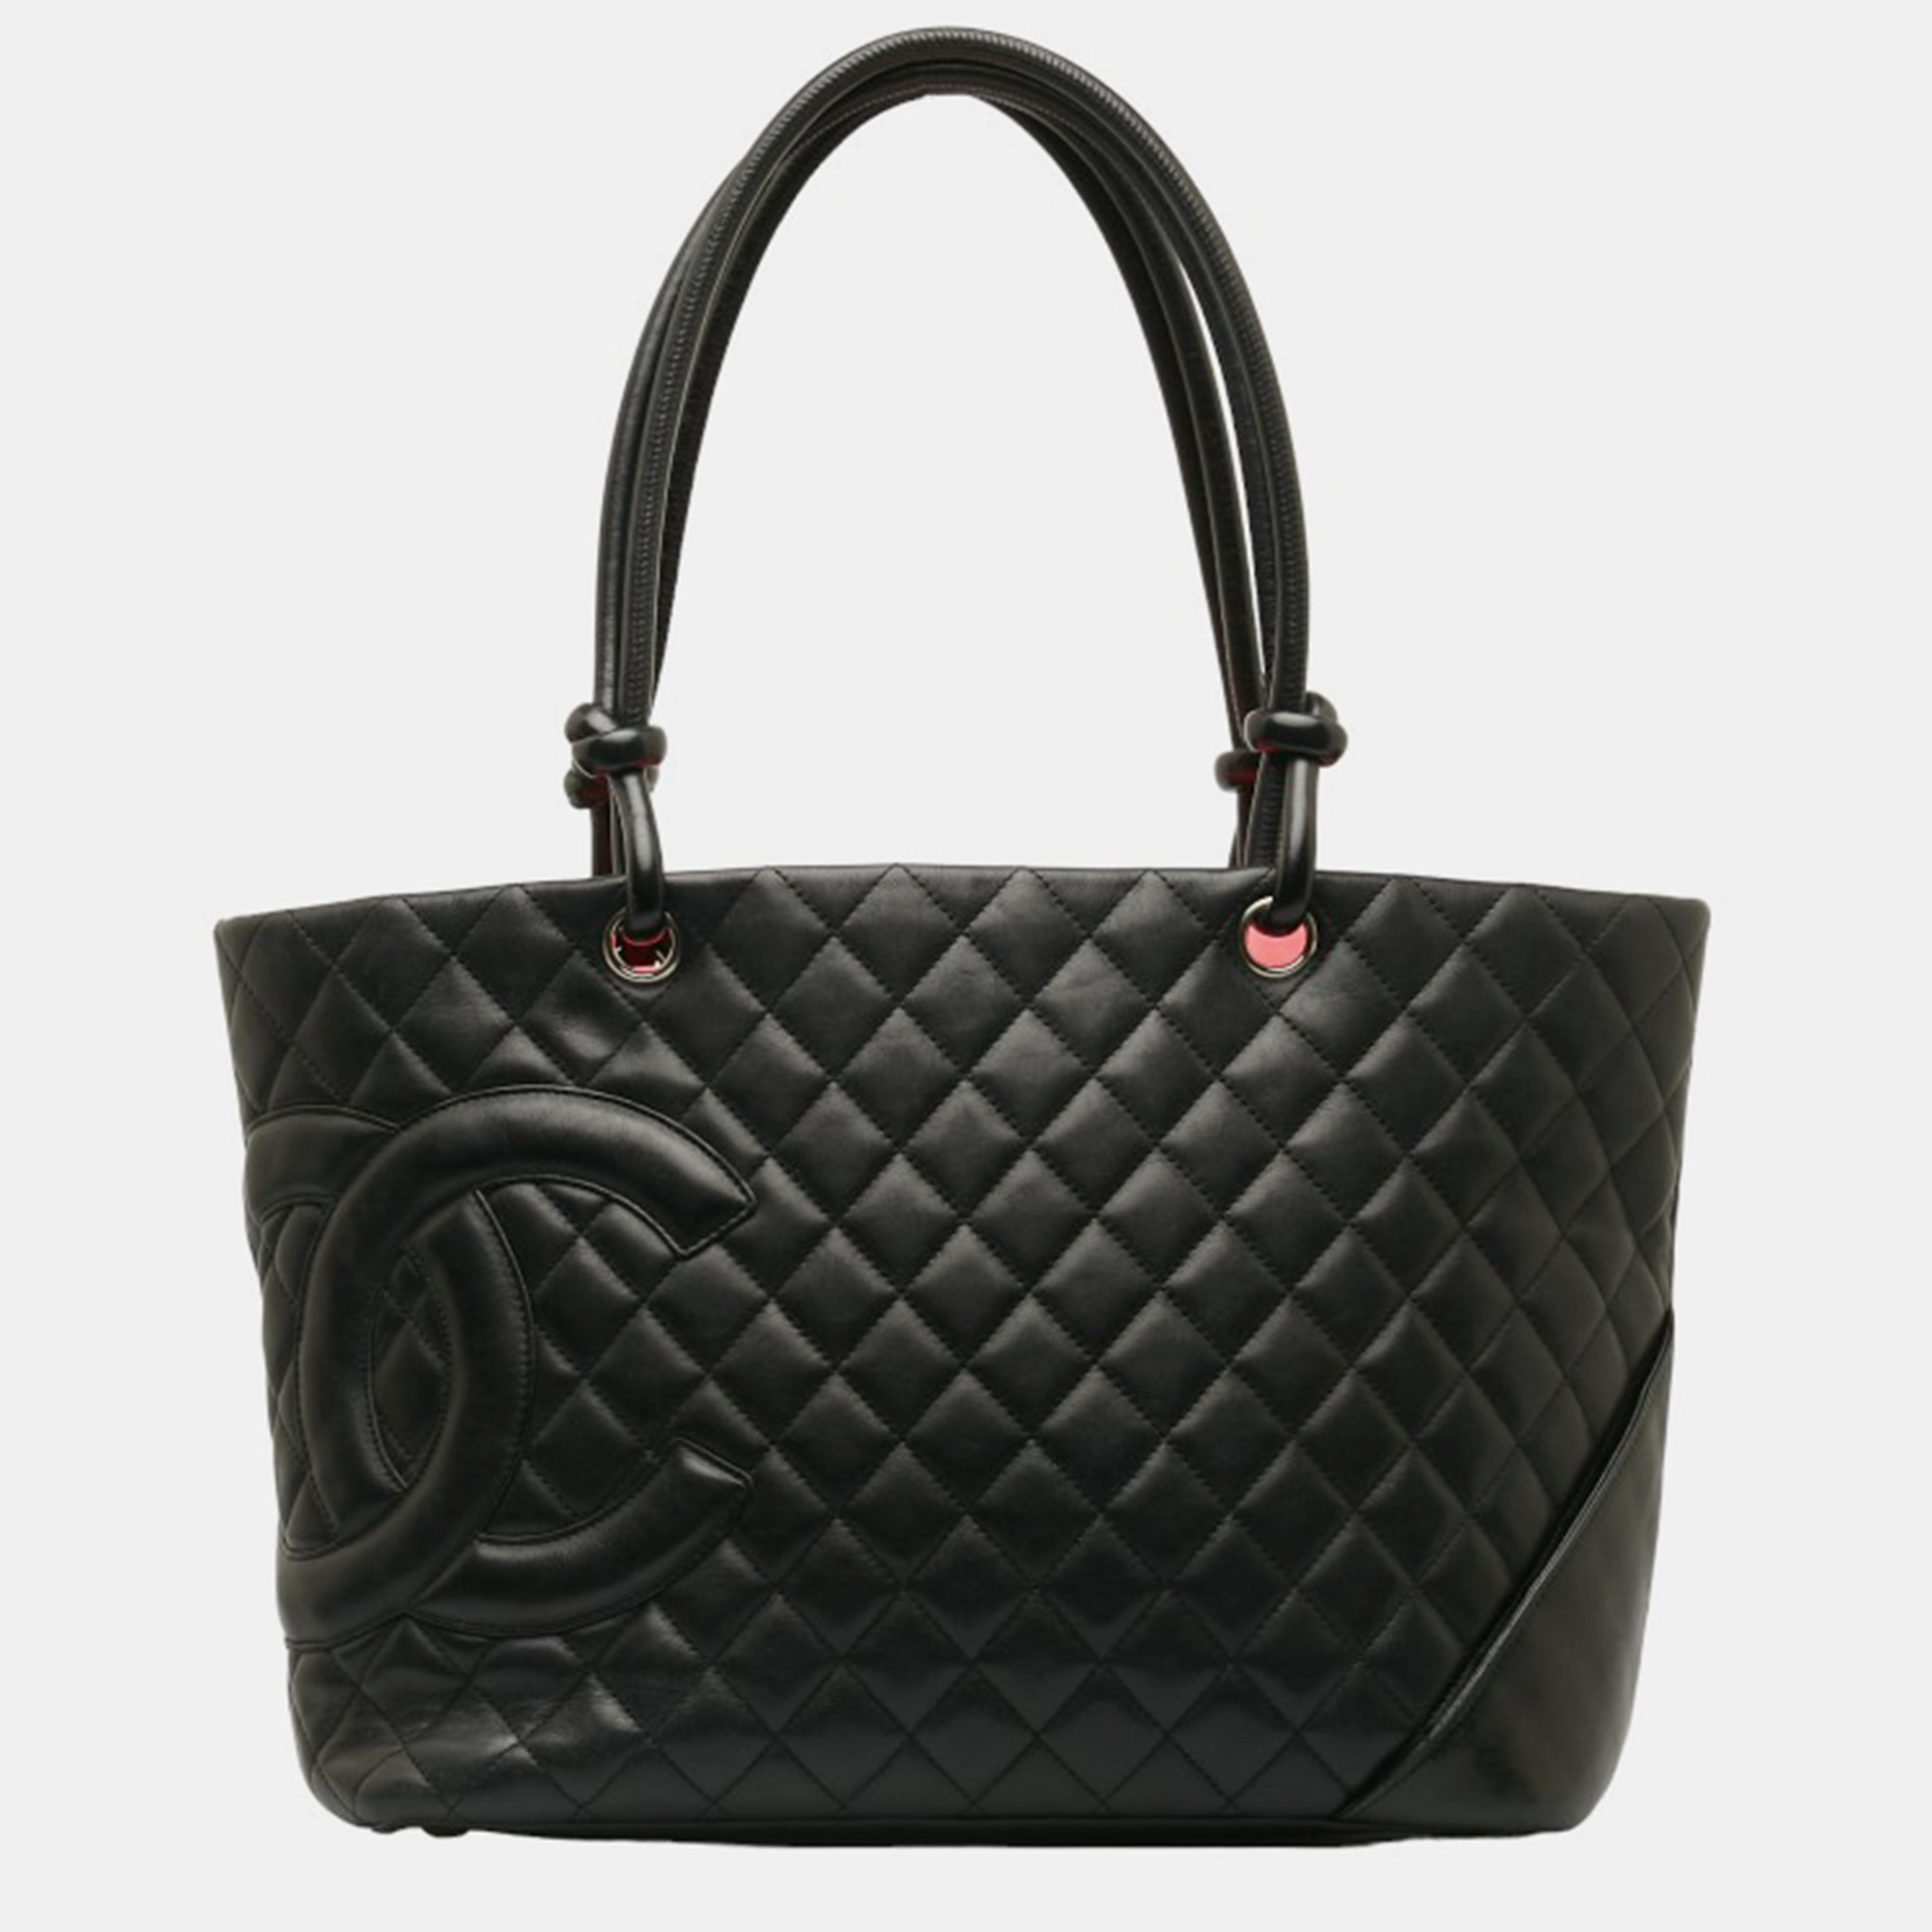 

Chanel Black Leather Cambon Large Tote Bag